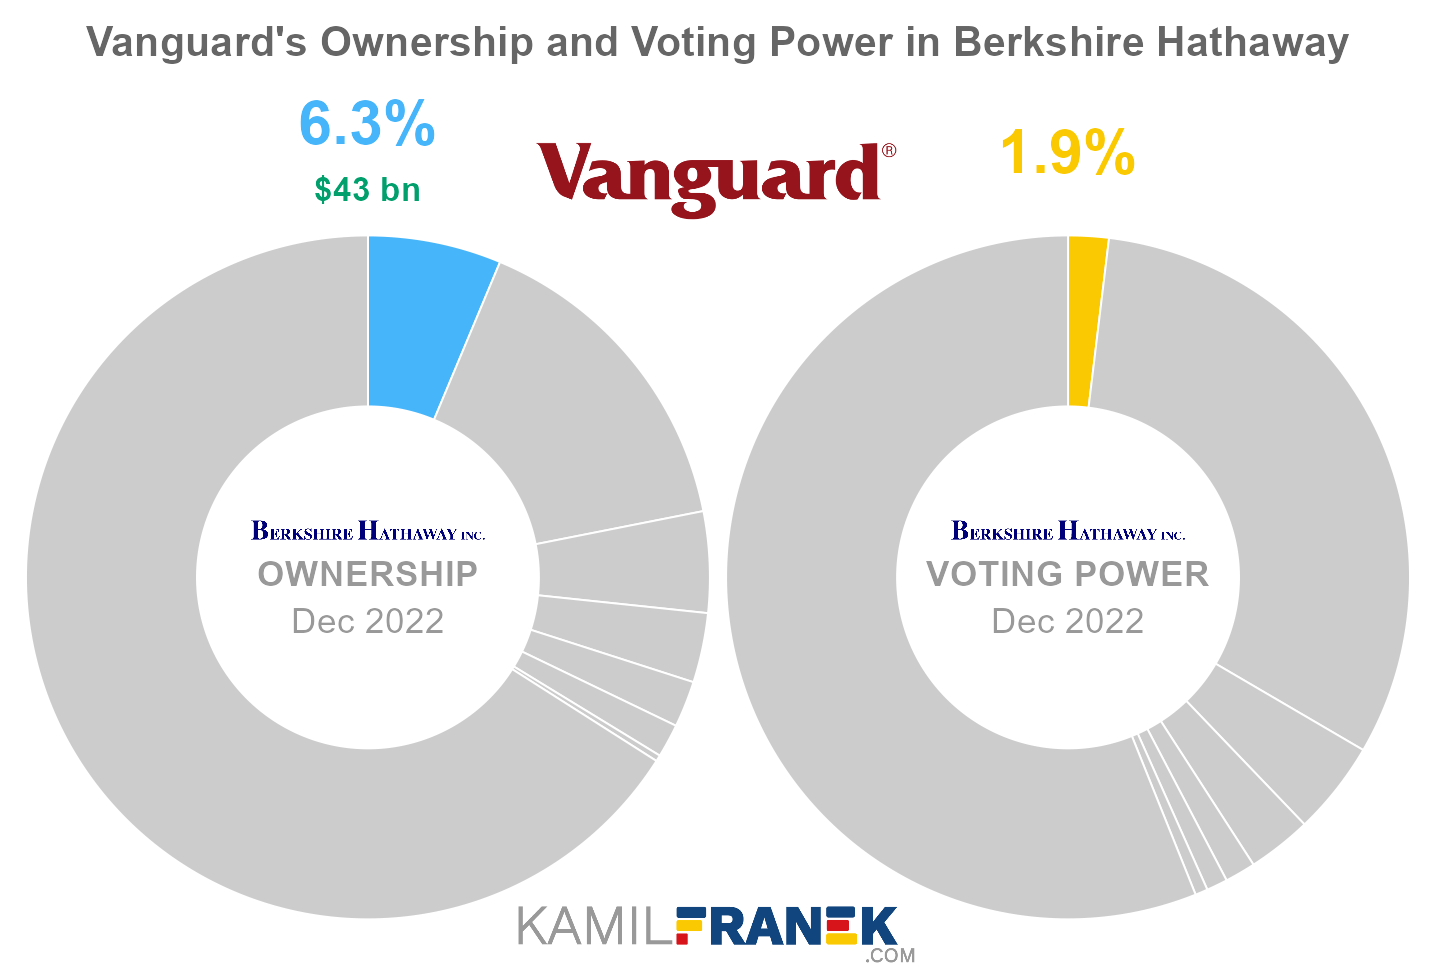 Vanguard's share ownership and voting power in Berkshire Hathaway (chart)